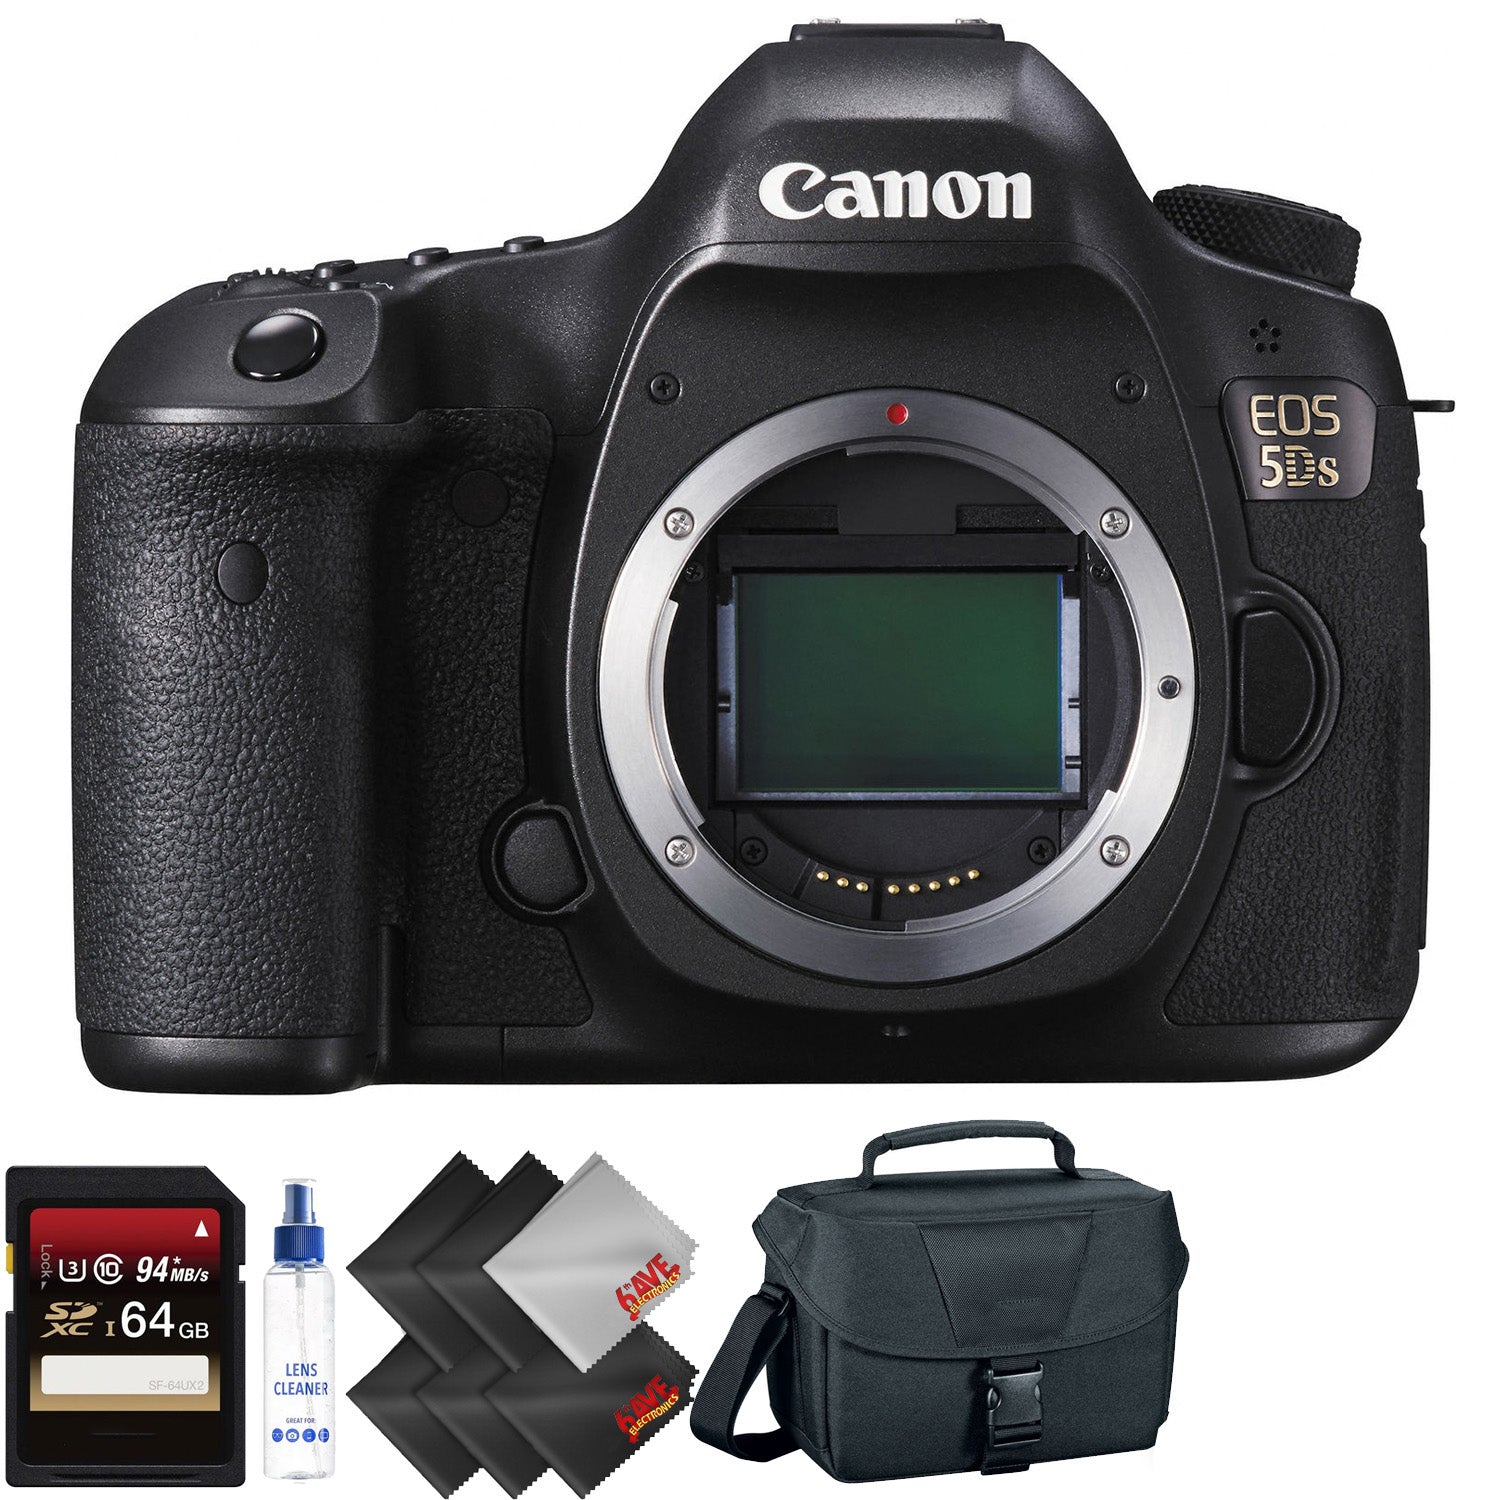 Canon EOS 5DS DSLR Camera (Body Only) + 64GB Memory Card + 1 Year Warranty Advanced Bundle